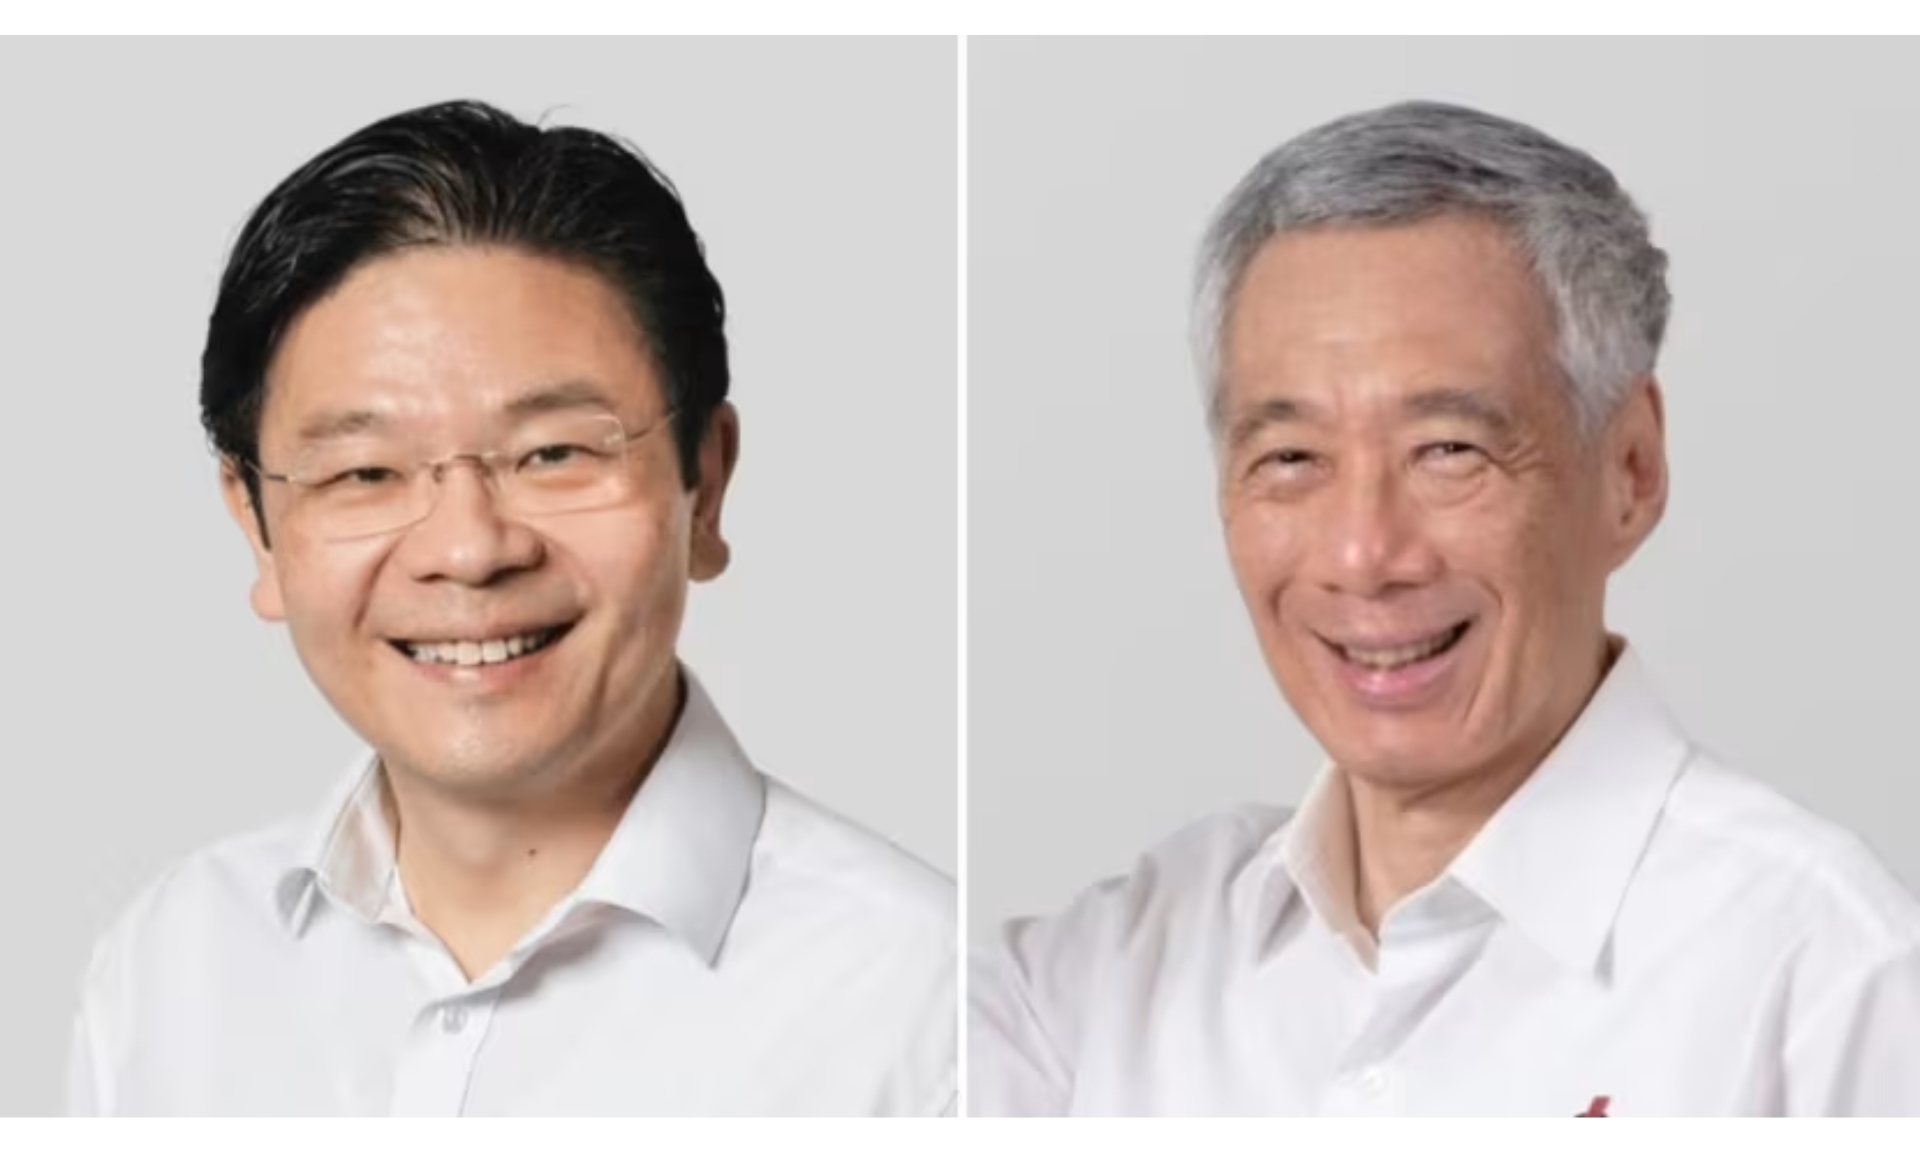 Singapore's Deputy Prime Minister Lawrence Wong (left) and Prime Minister Lee Hsien Loong. (Photos: PAP website)